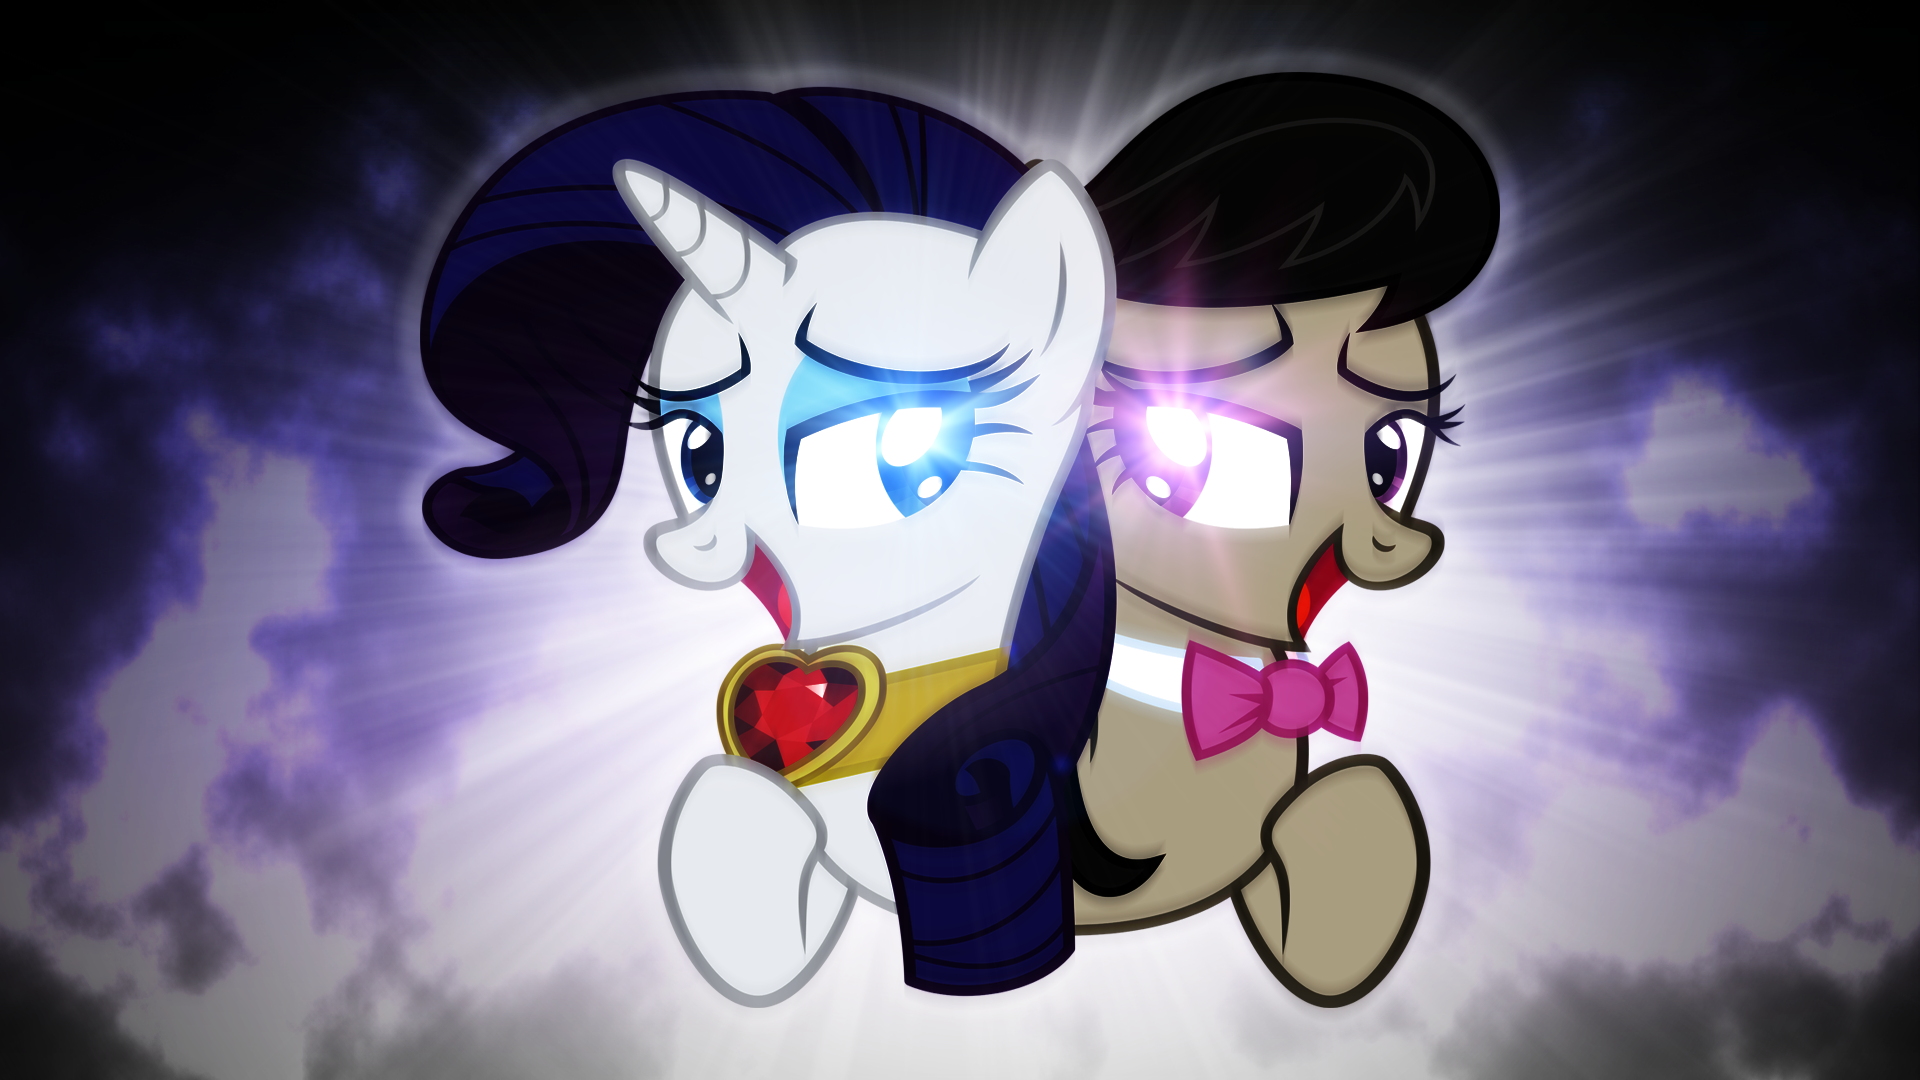 Rarity and Octavia 2 by BronyYAY123 and Quanno3